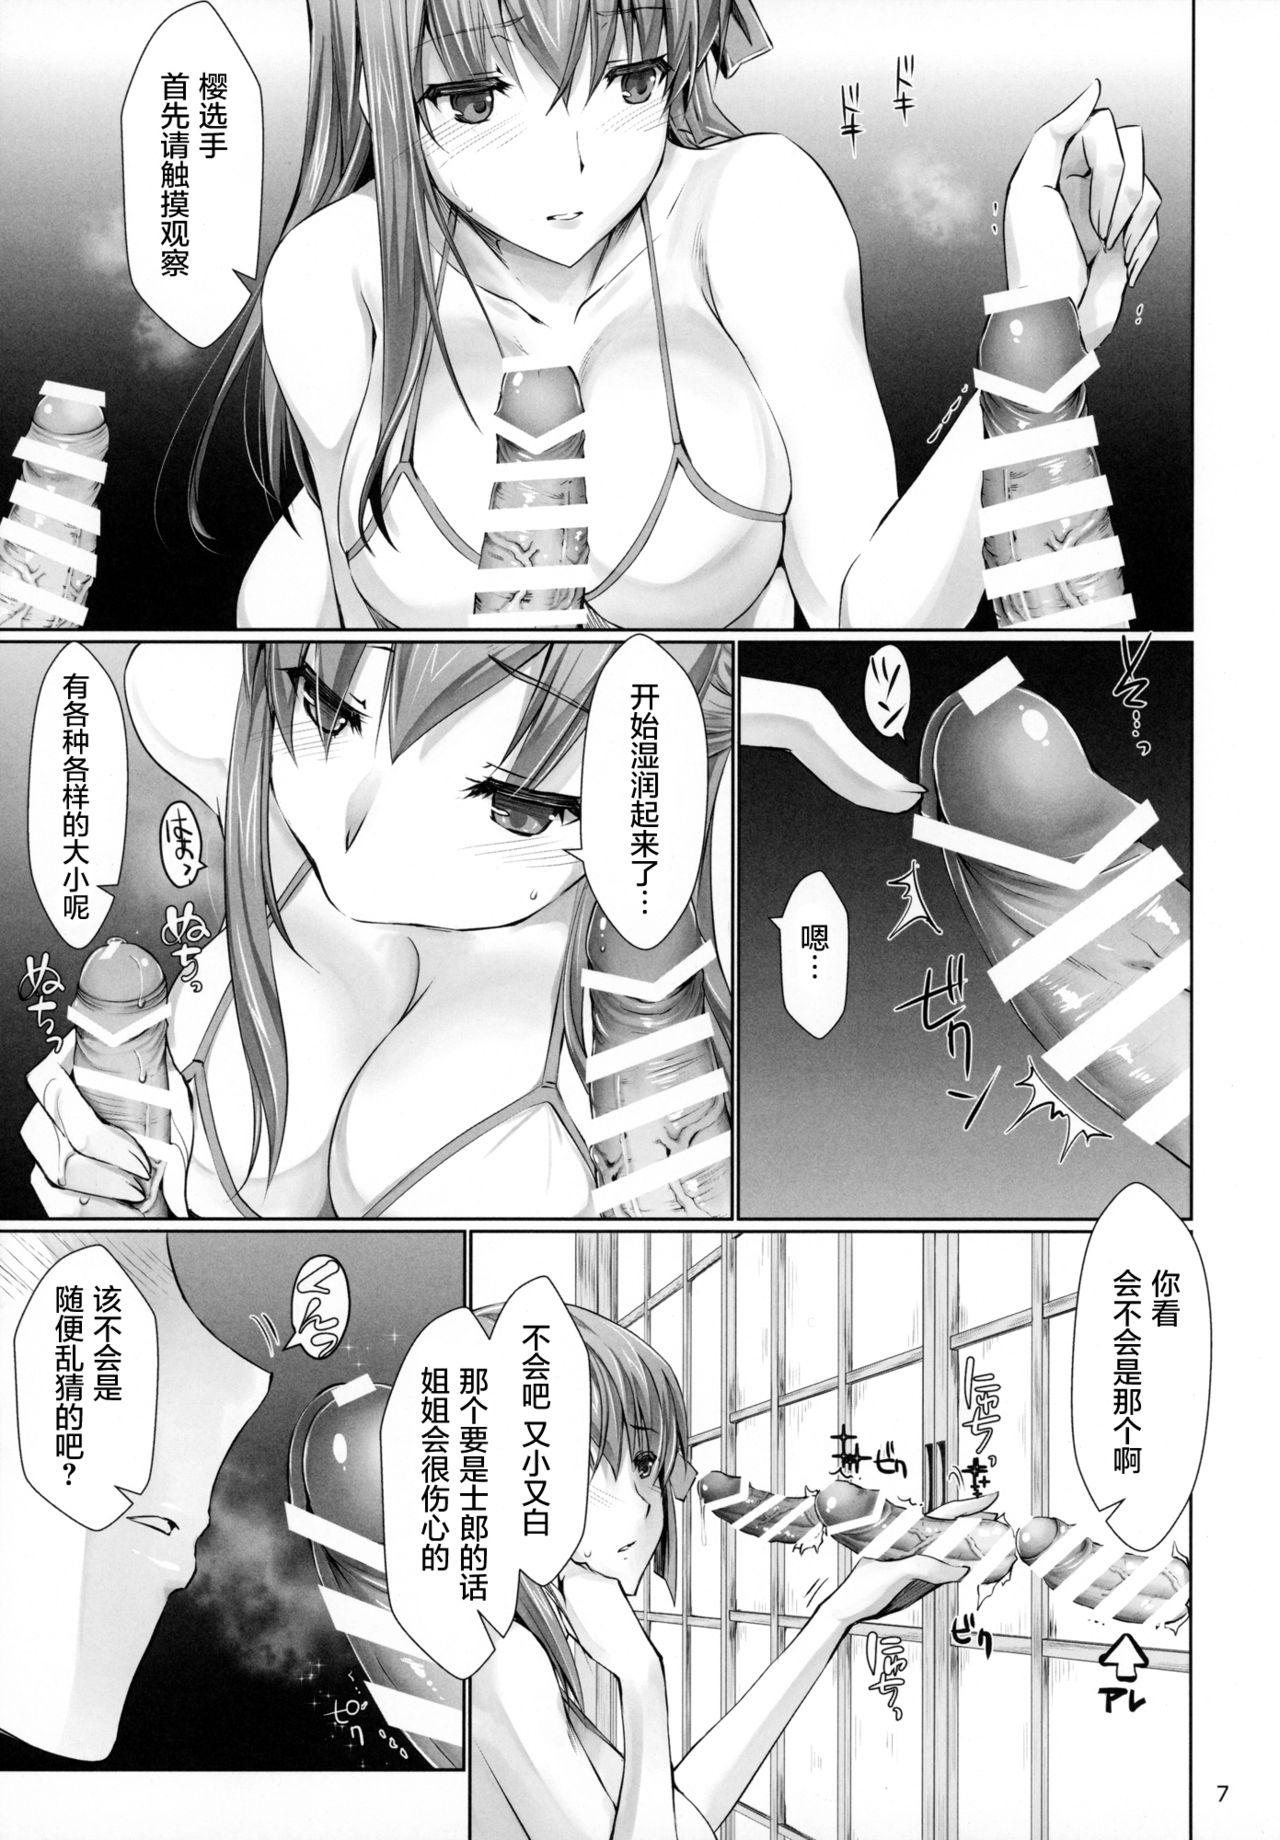 Wank I miss you. - Fate stay night Group Sex - Page 7